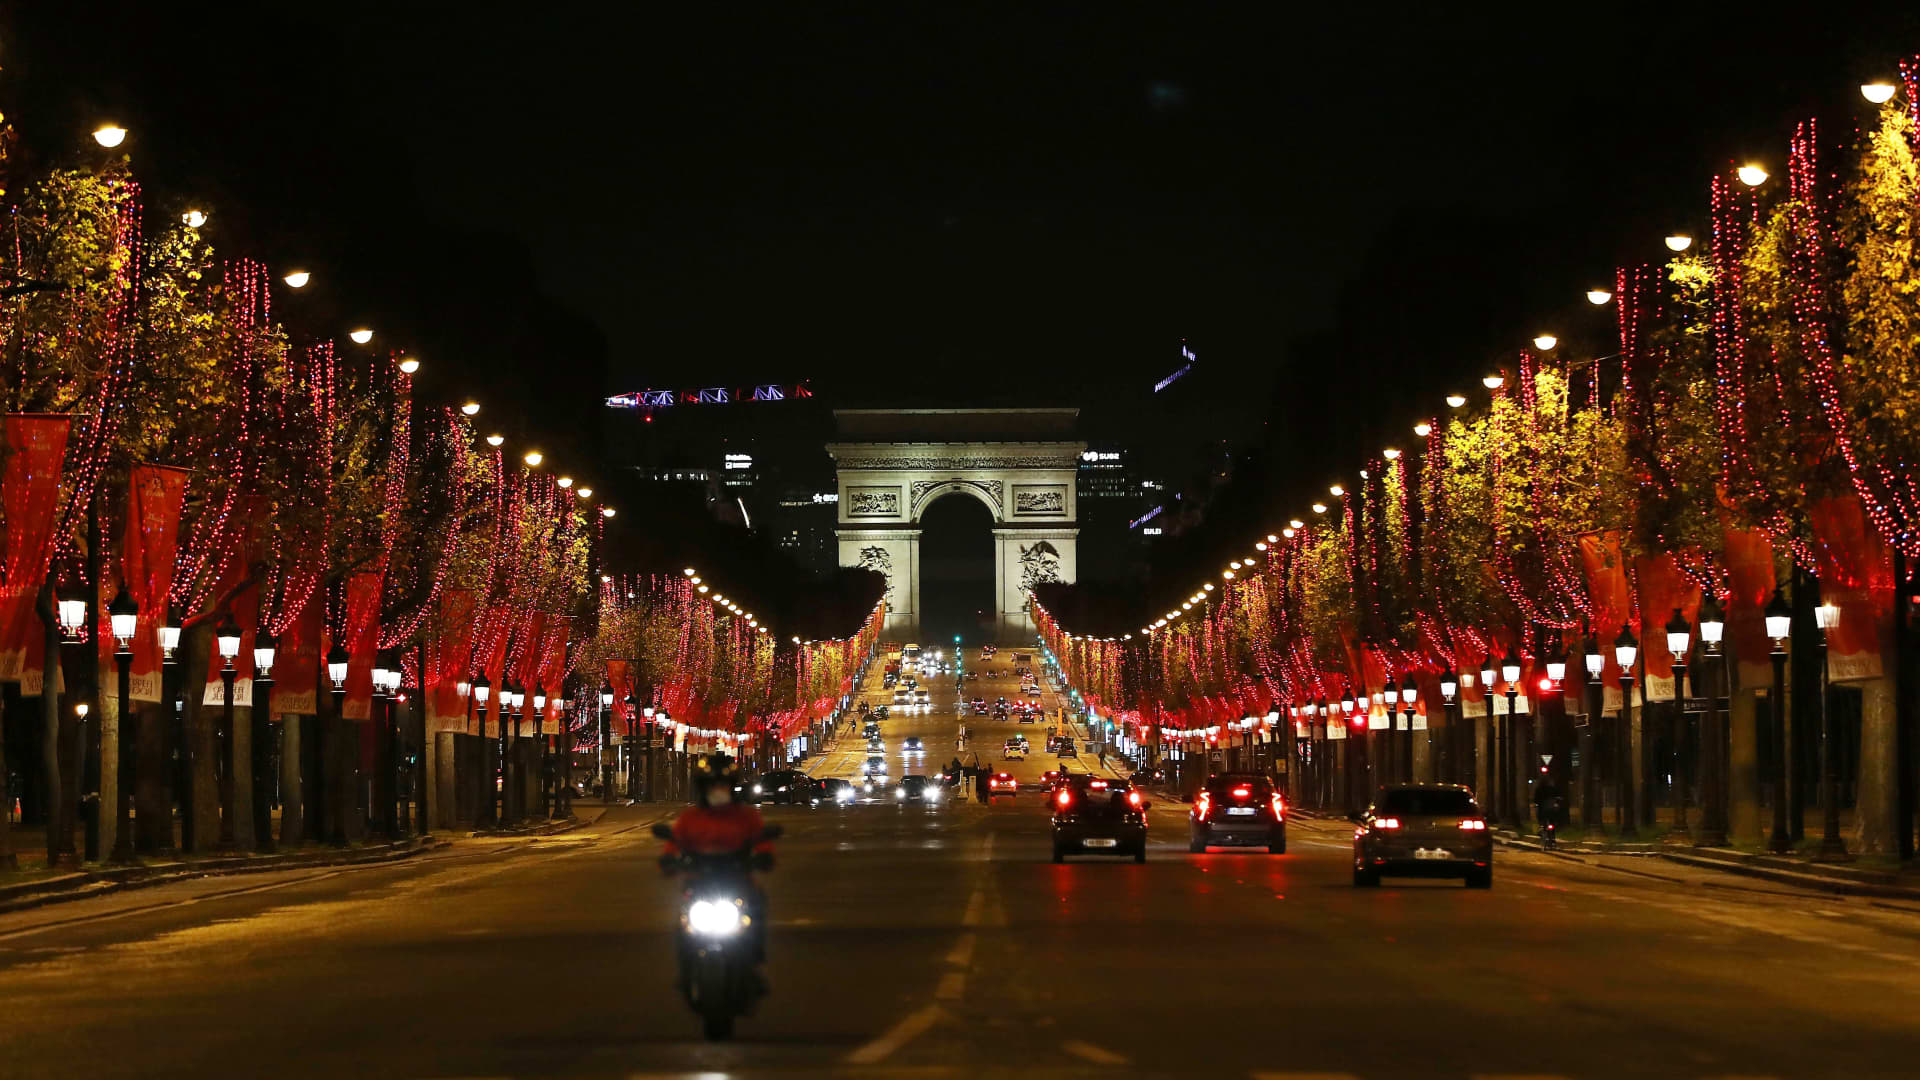 The Champs-Elysees Avenue and the Arc de Triomphe are seen after the Christmas illuminations were switched on in Paris, France, Nov. 22, 2020.